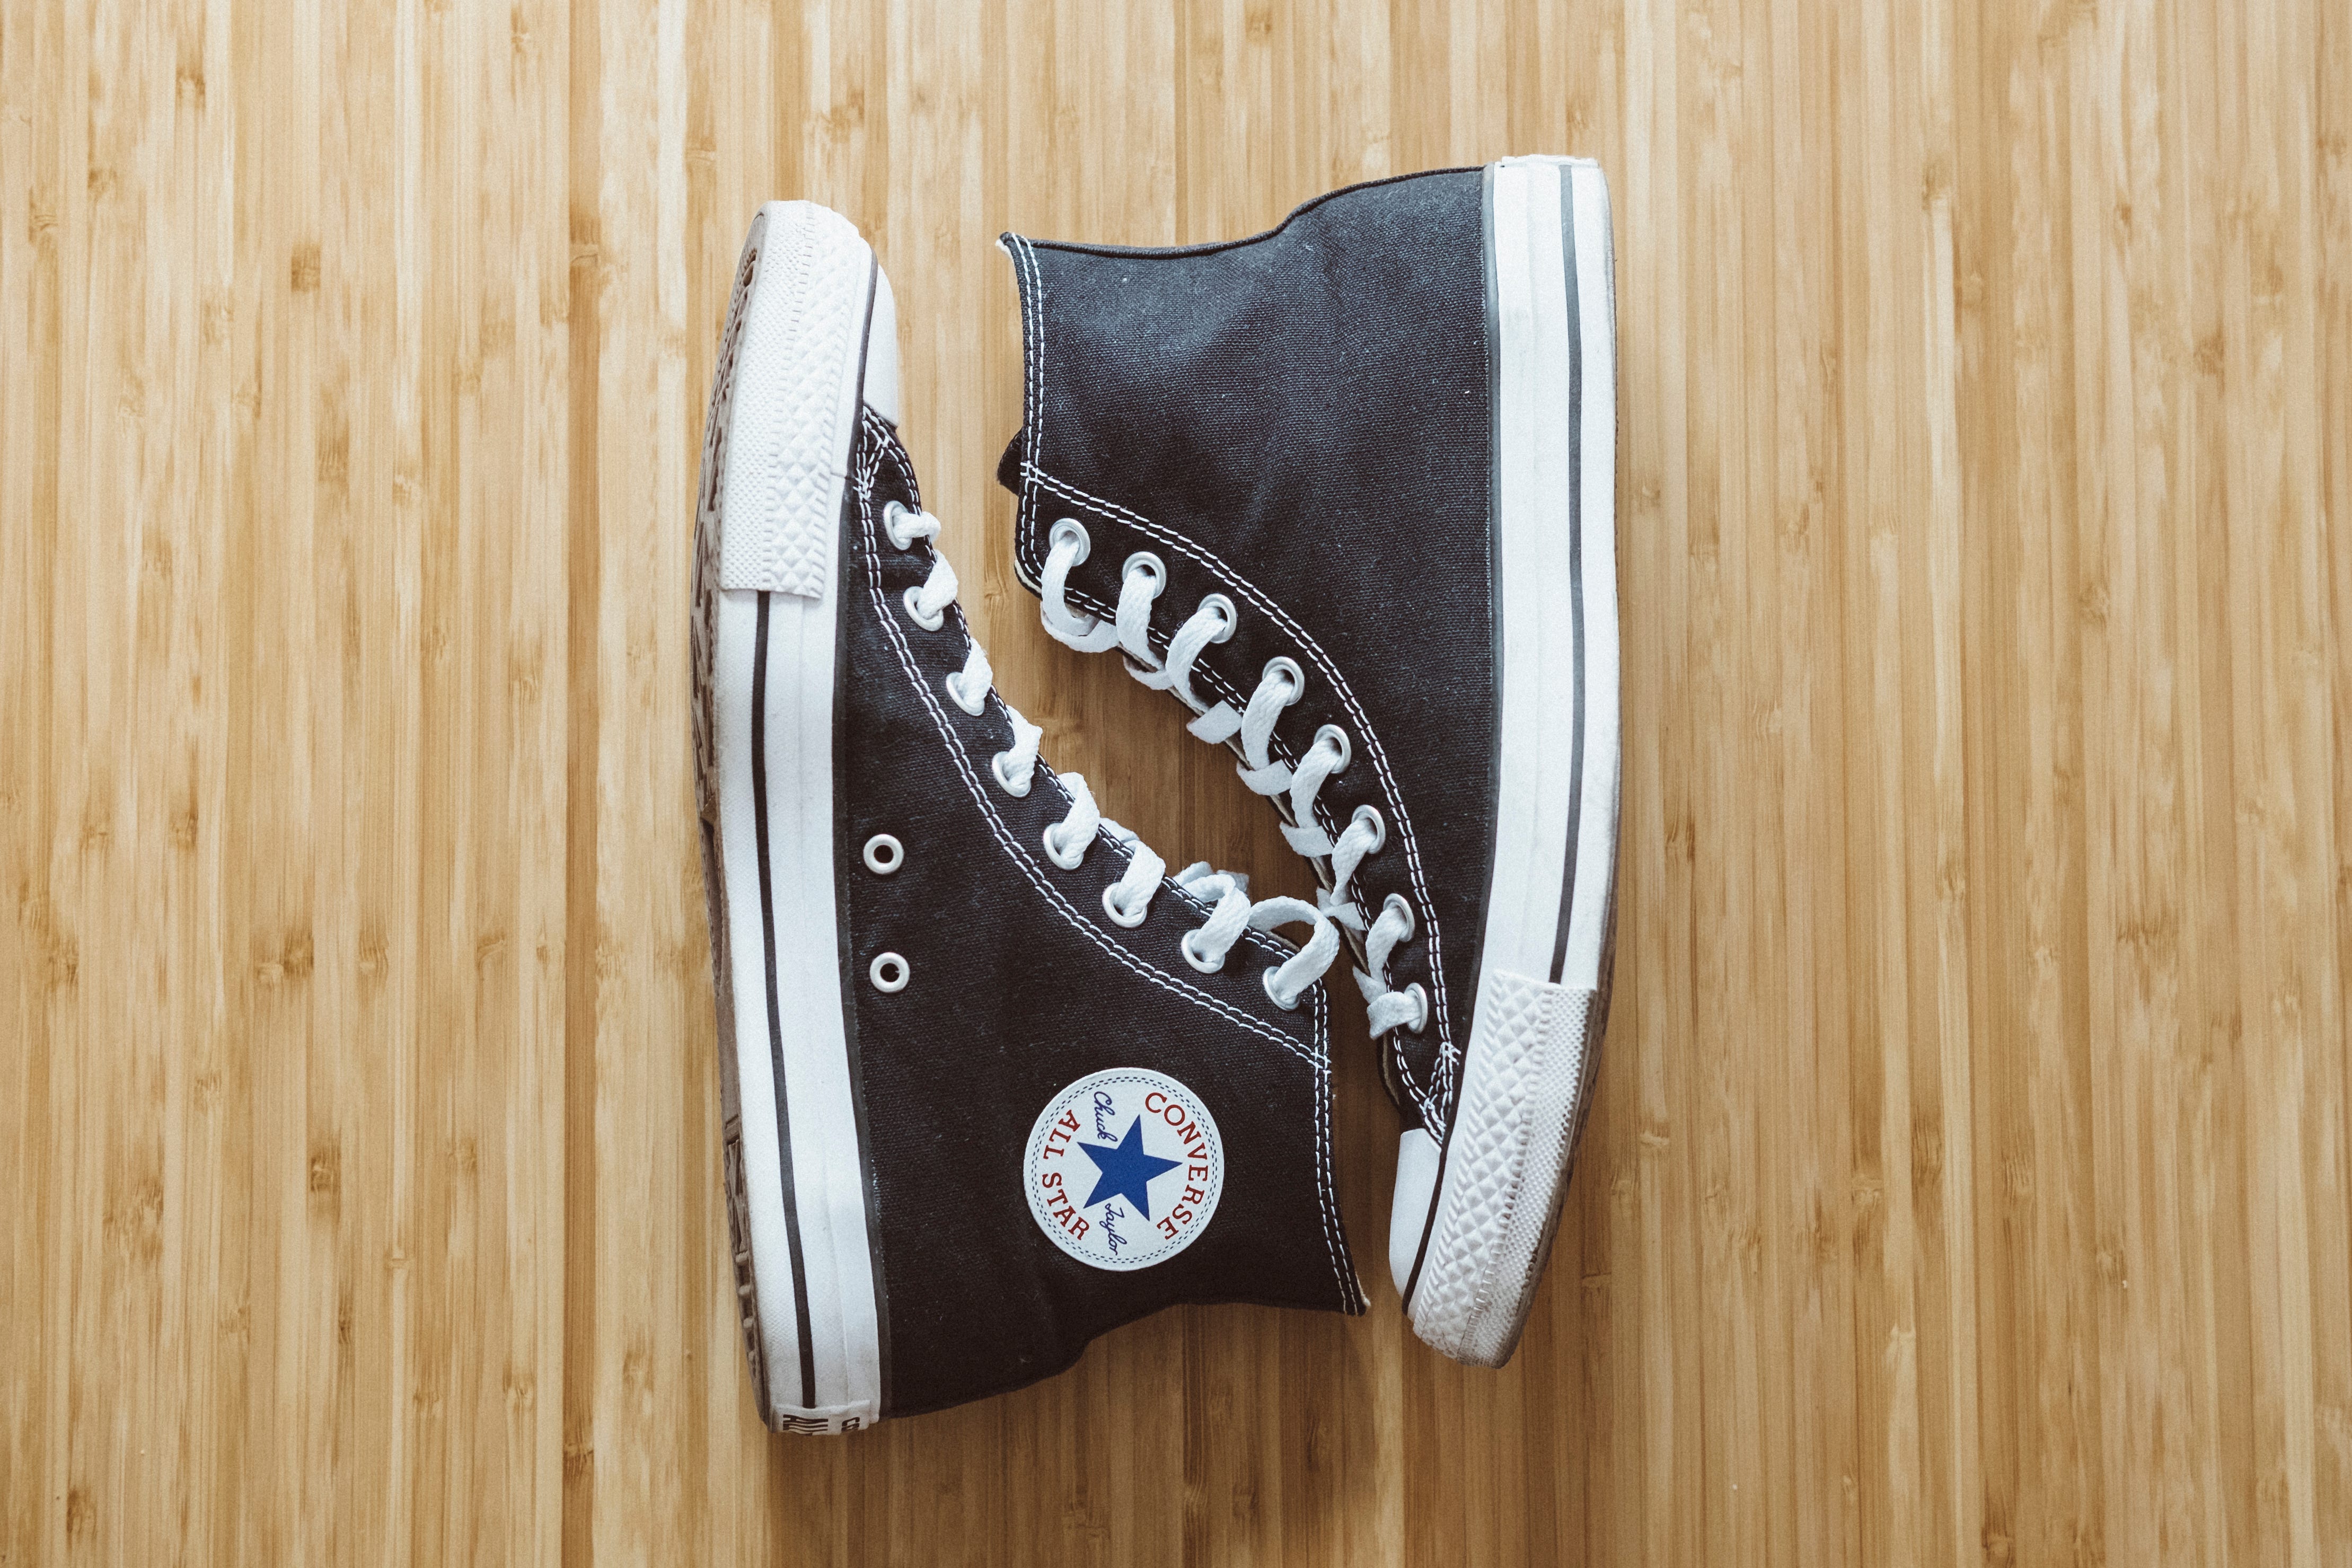 How Converse Sells a Pair of Chucks Every 43 Seconds | by Andrei Tapalaga  ✒️ | Better Marketing | Medium